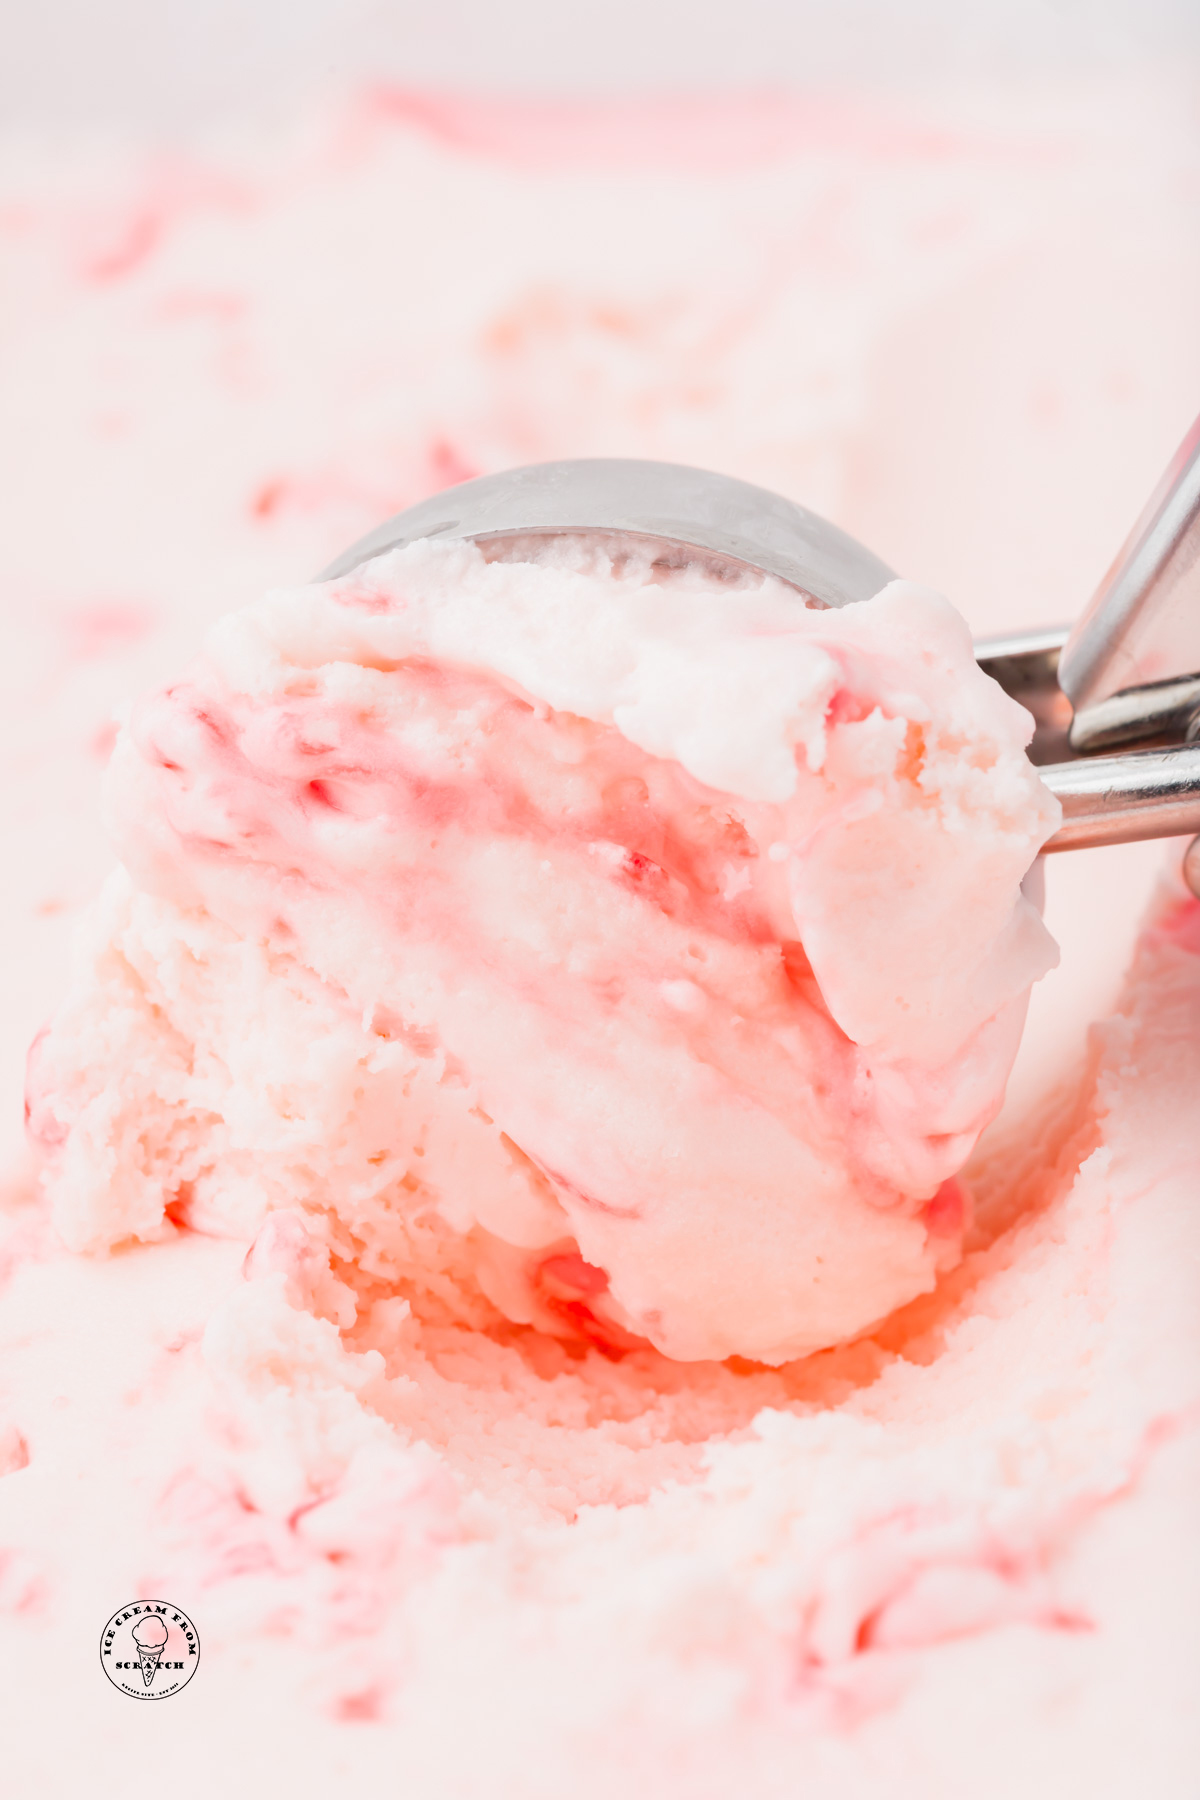 A metal ice cream scoop pulling a scoop of homemade candy cane ice cream, viewed close-up